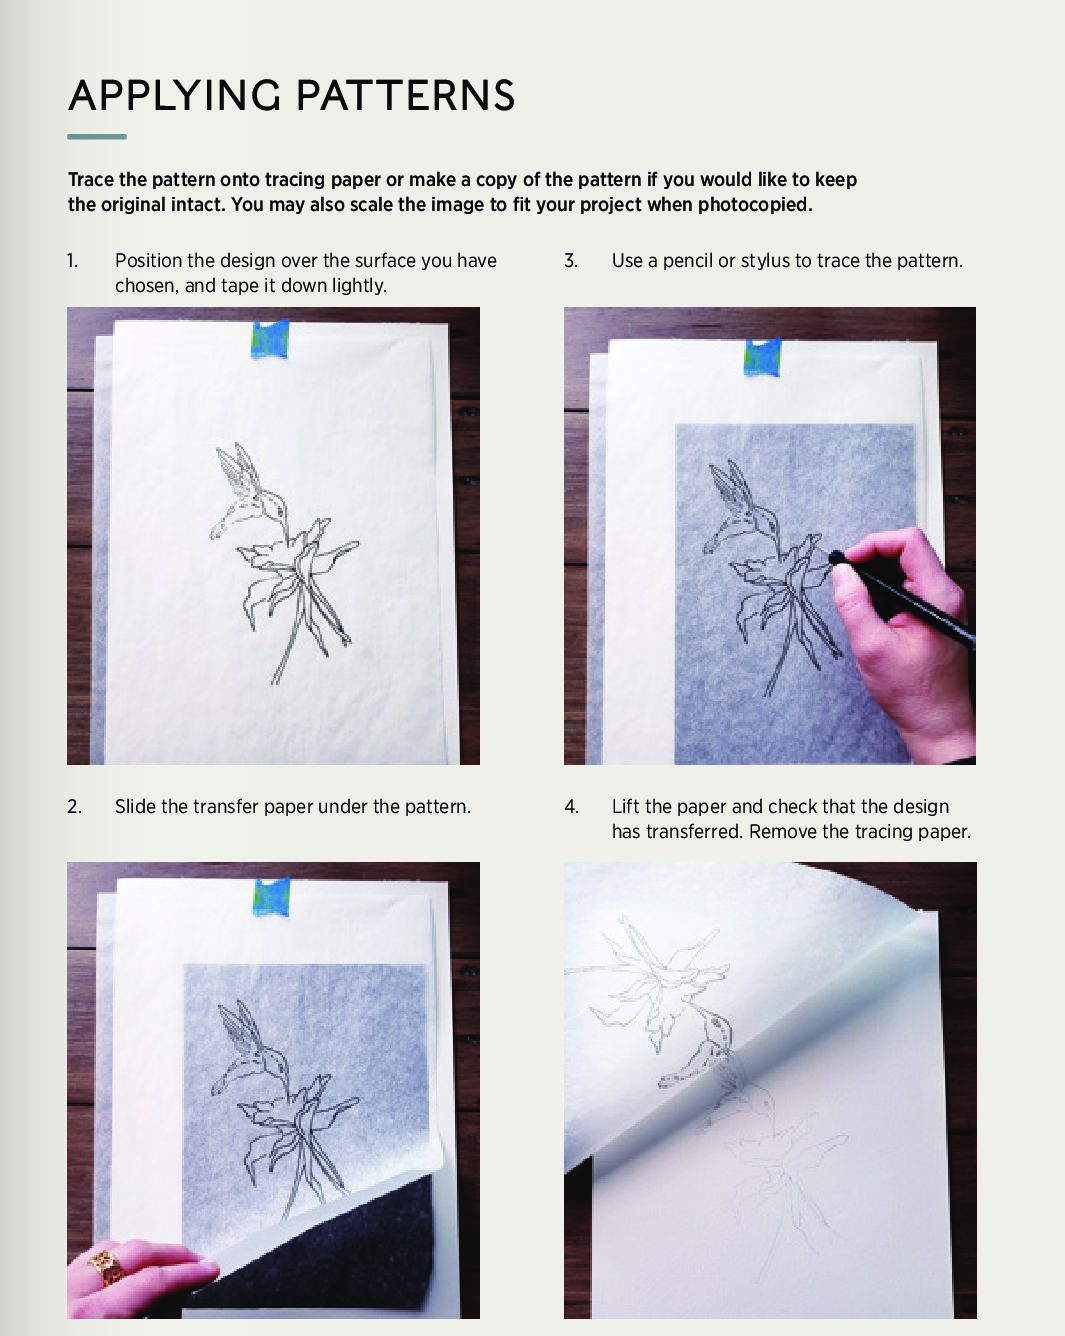 HOW TO USE TRACING PAPERS 